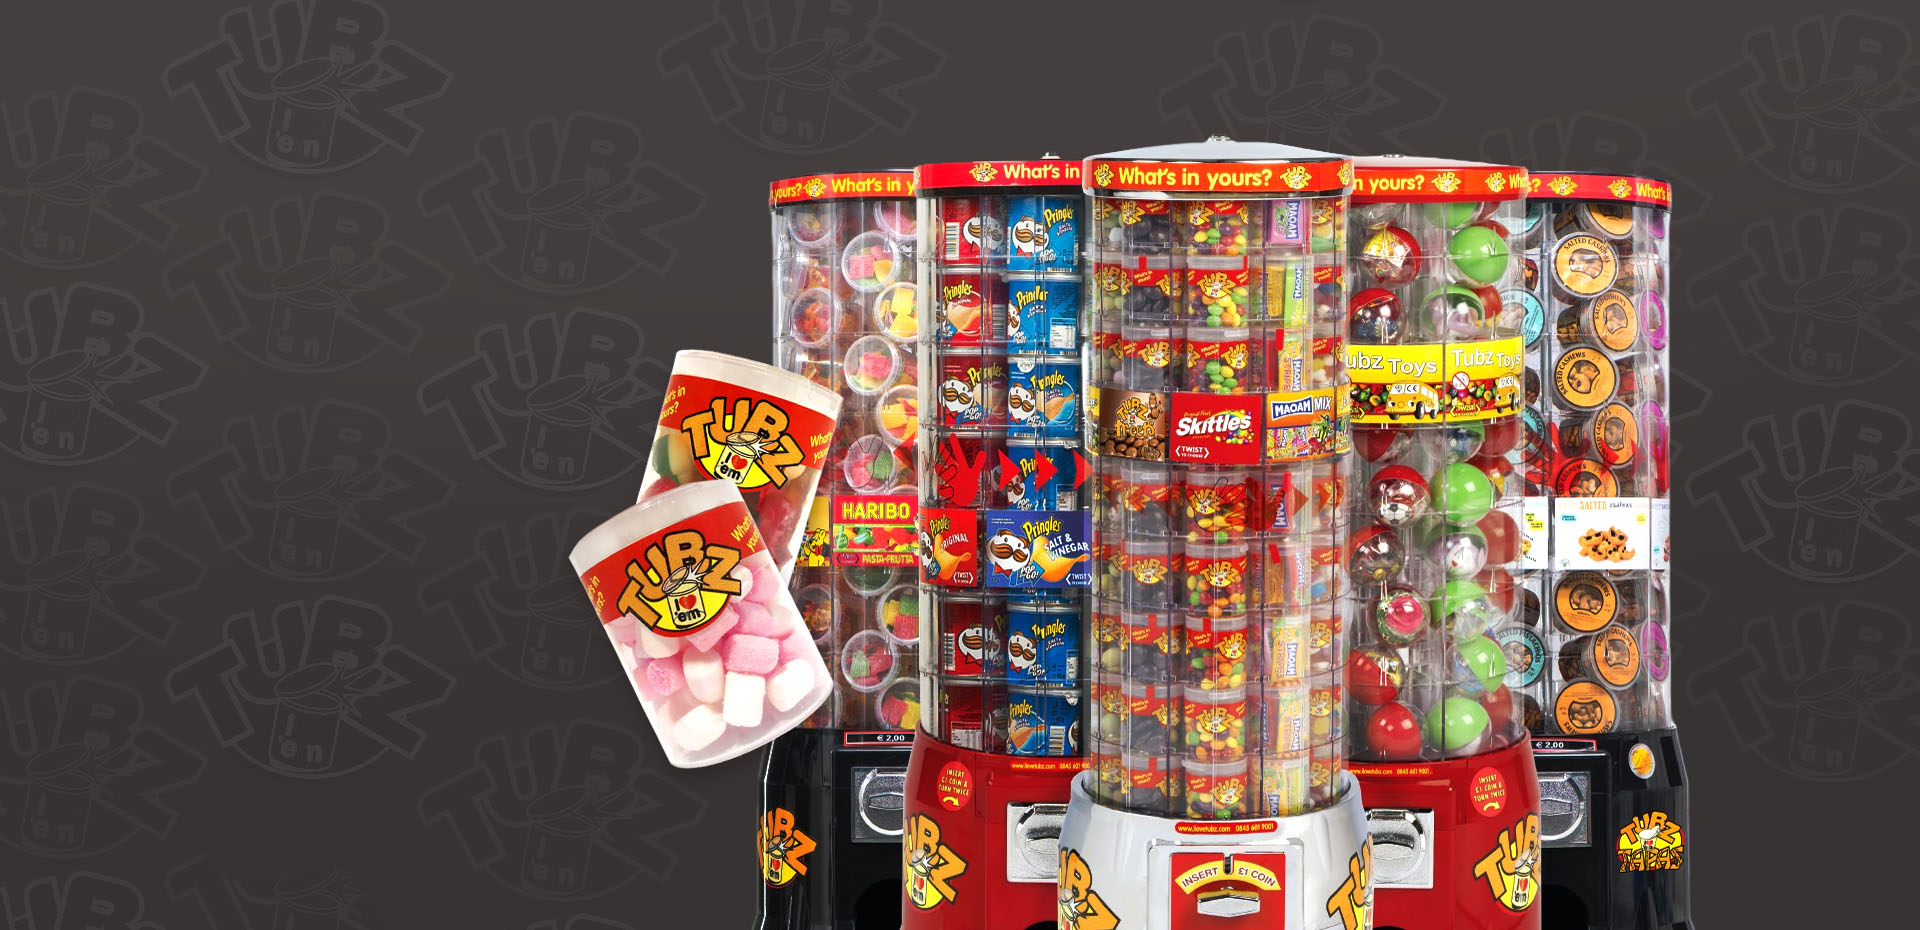 Installers Of Sweets Vending Machines For Soft Play Establishments